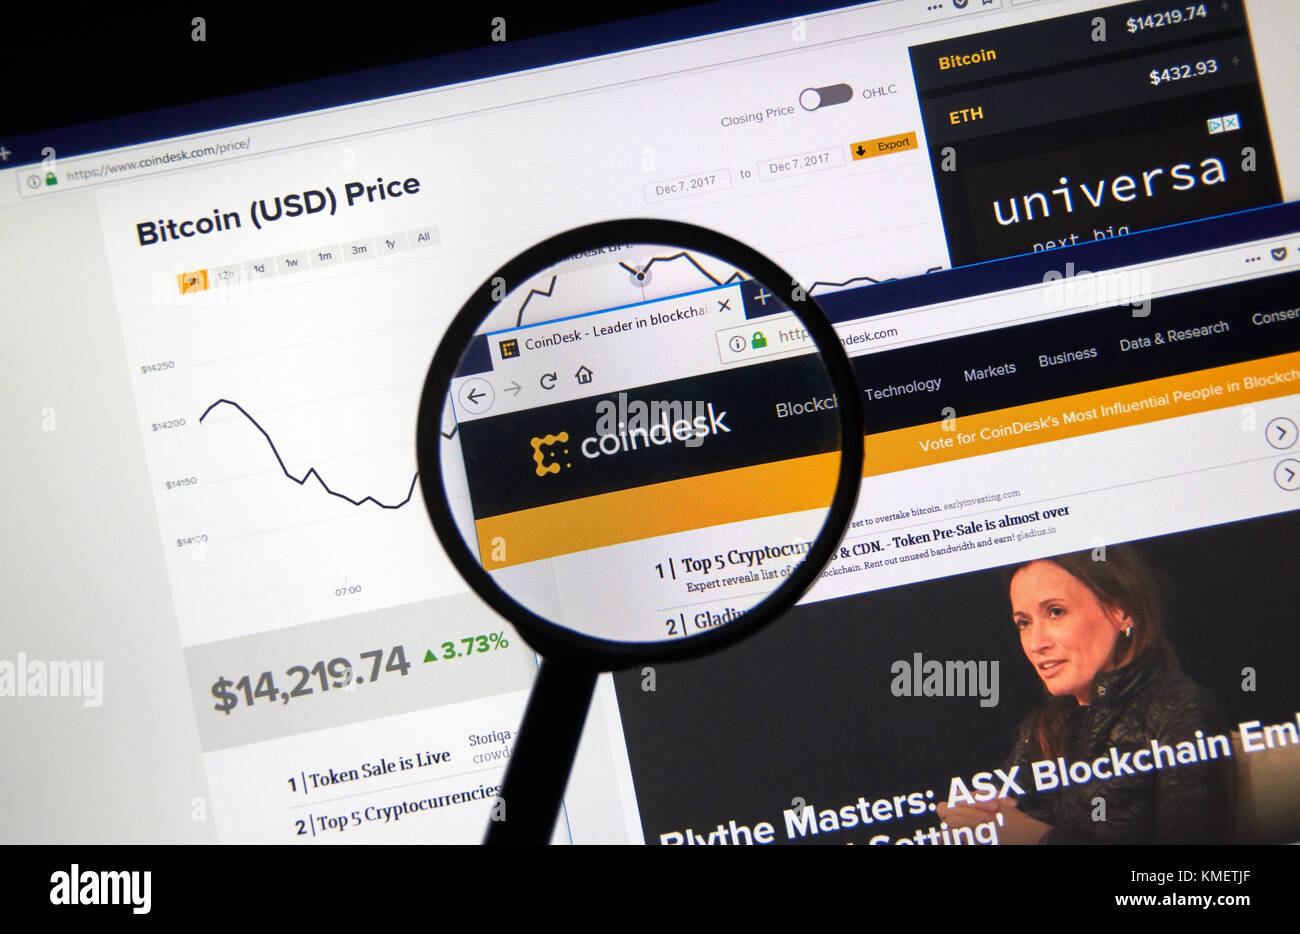 MONTREAL, CANADA - DECEMBER 7, 2017: Coindesk home webpage and logo under magnifying glass. CoinDesk is a news site specializing in bitcoin and digita Stock Photo